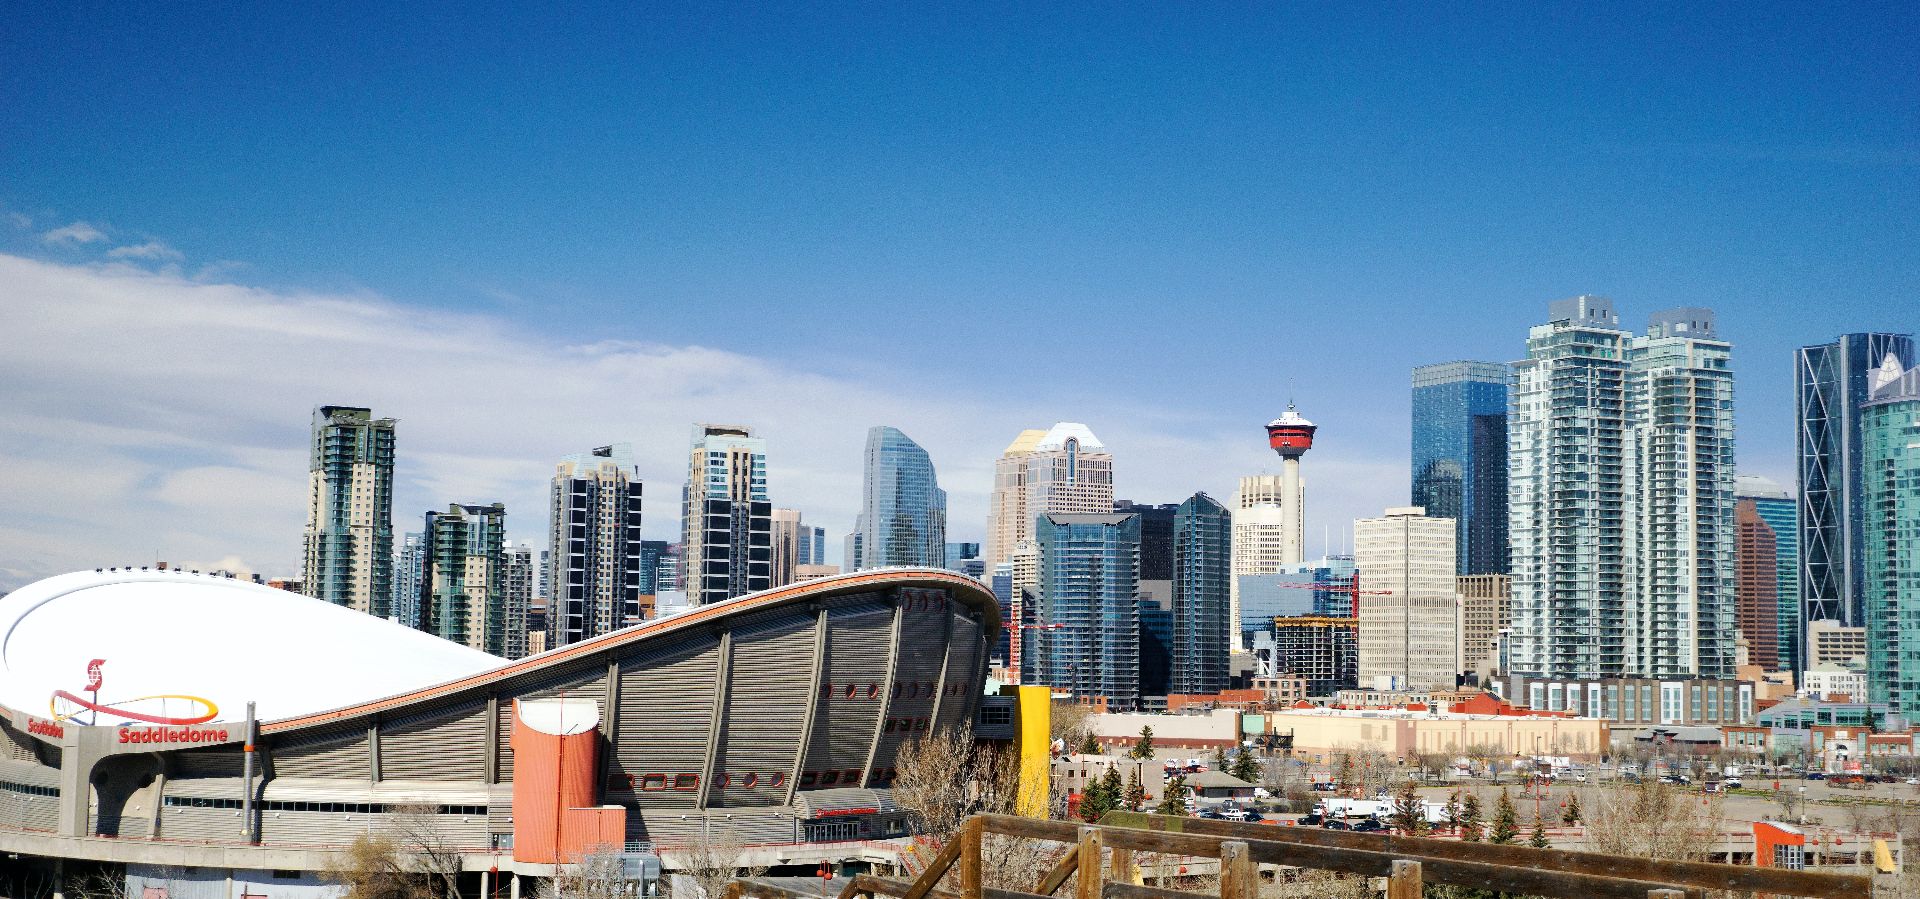 BreakOut West Announces Calgary, AB as Host City Celebrating The Festival, Conference and Award's 20th Anniversary